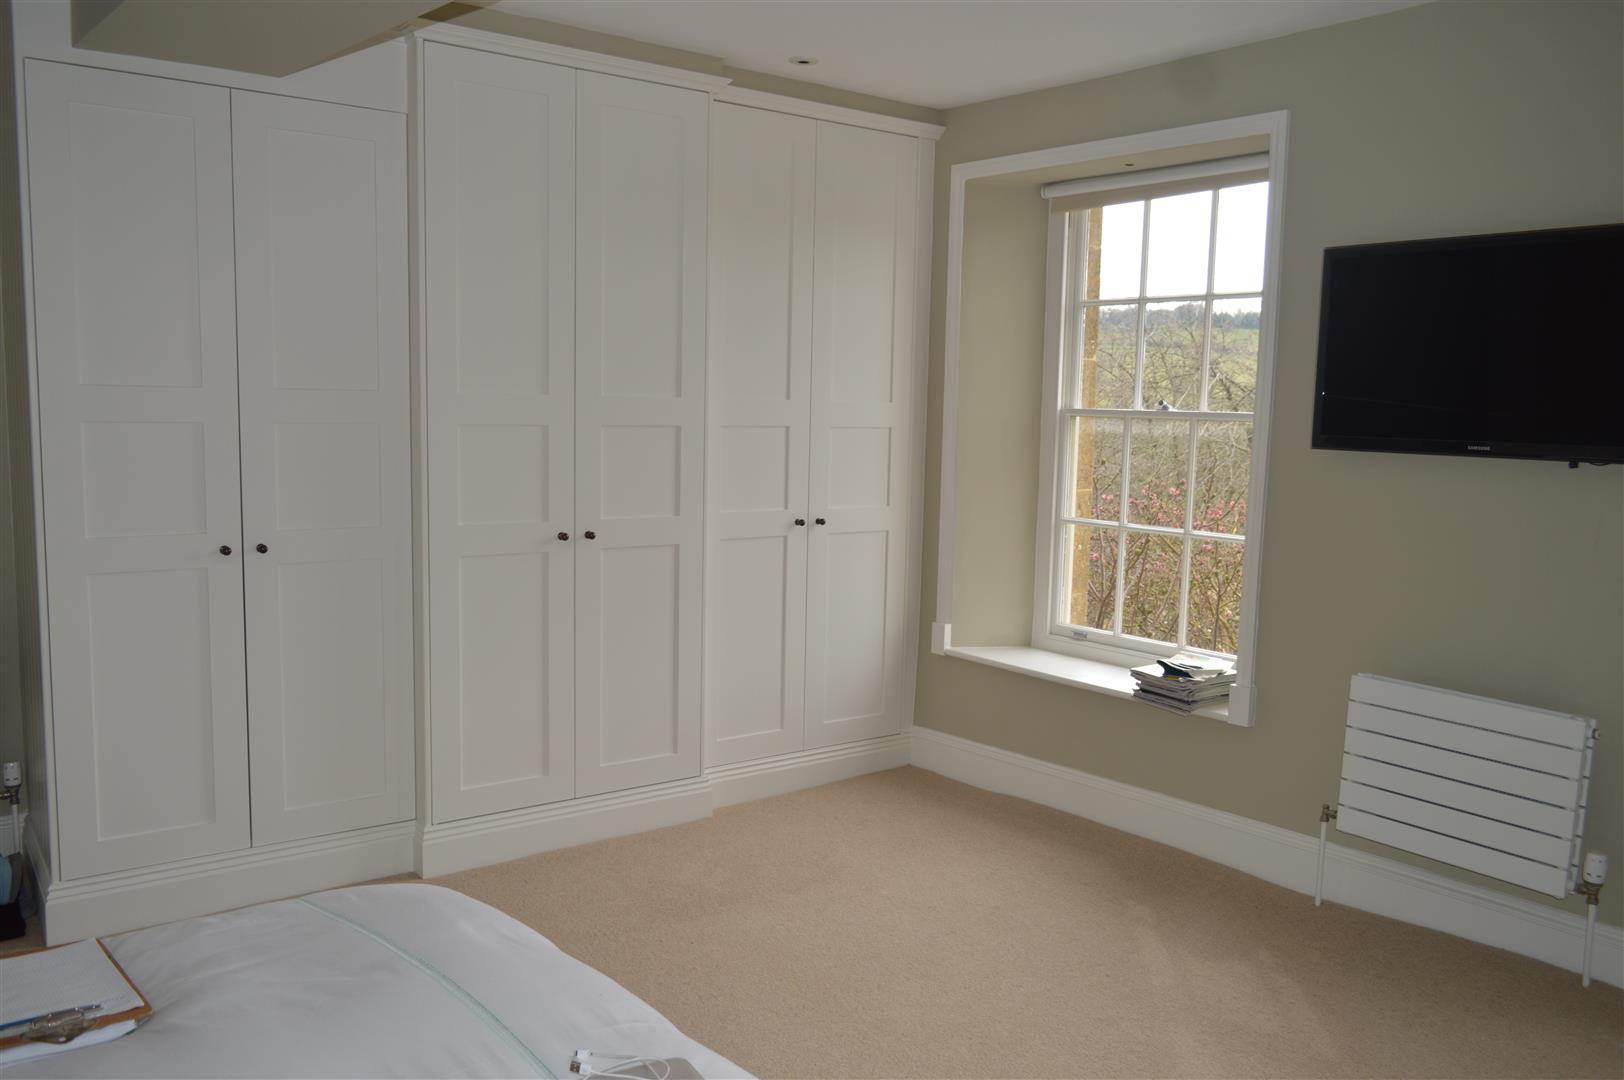 Another nice of view of a row of shaker wardrobes. We can have a chat to decide how best to use the space to suit your lifestyle with hanging, shelves and various intelligent storage solutions.